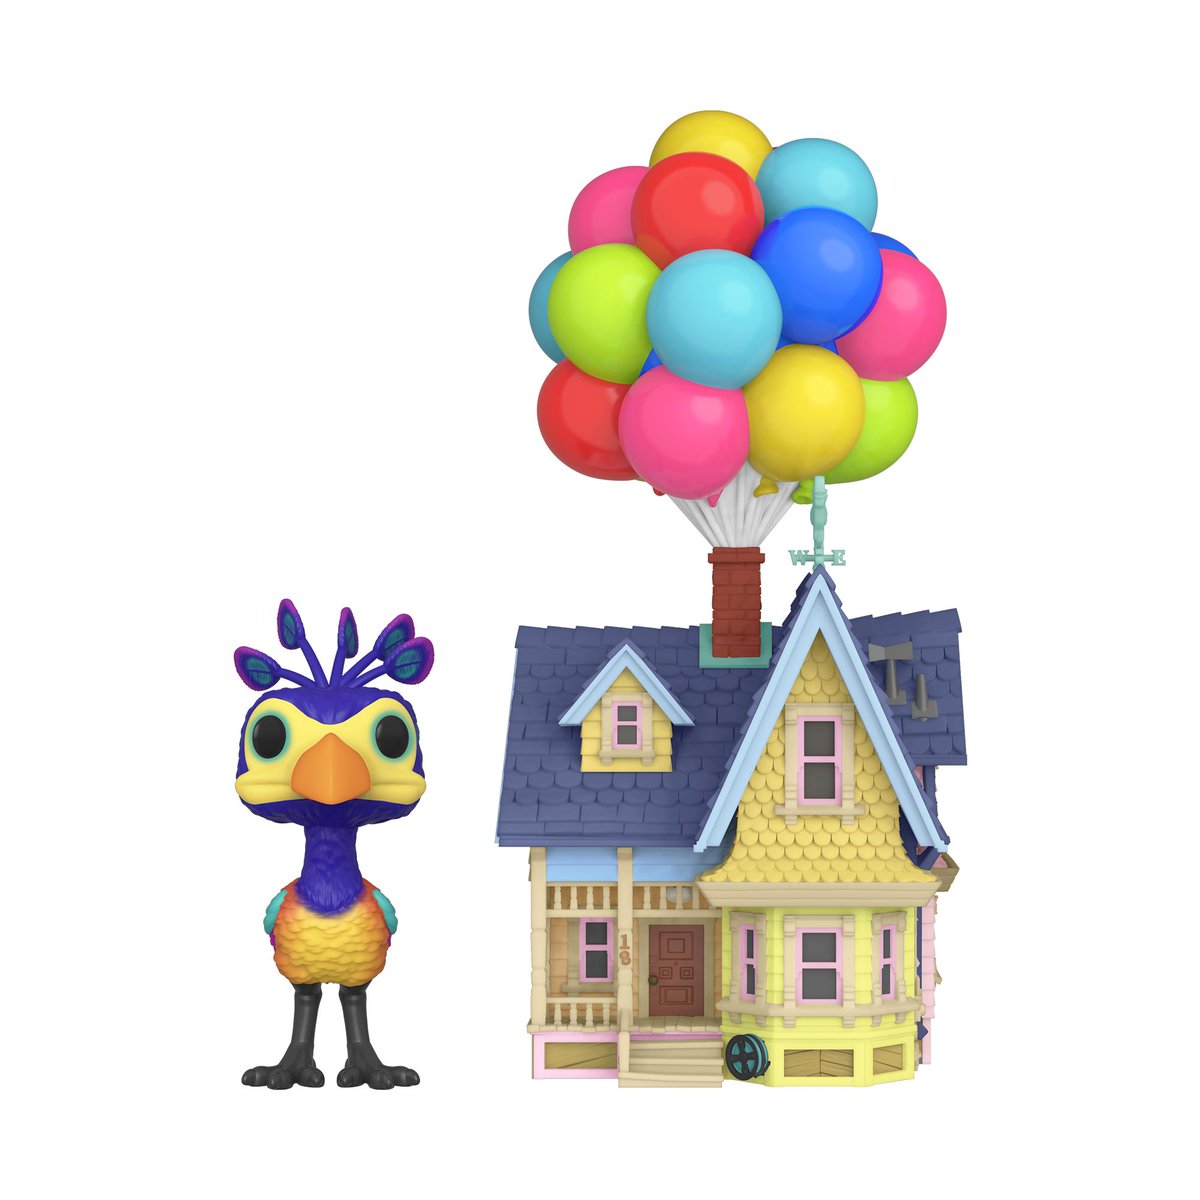 RT & follow @OriginalFunko for a chance to WIN a 2019 #NYCC exclusive Kevin With Up House Pop! Town! 
#Funko #Exclusive #Giveaway #FunkoNYCC #NYCC #Disney #Up #PopTown